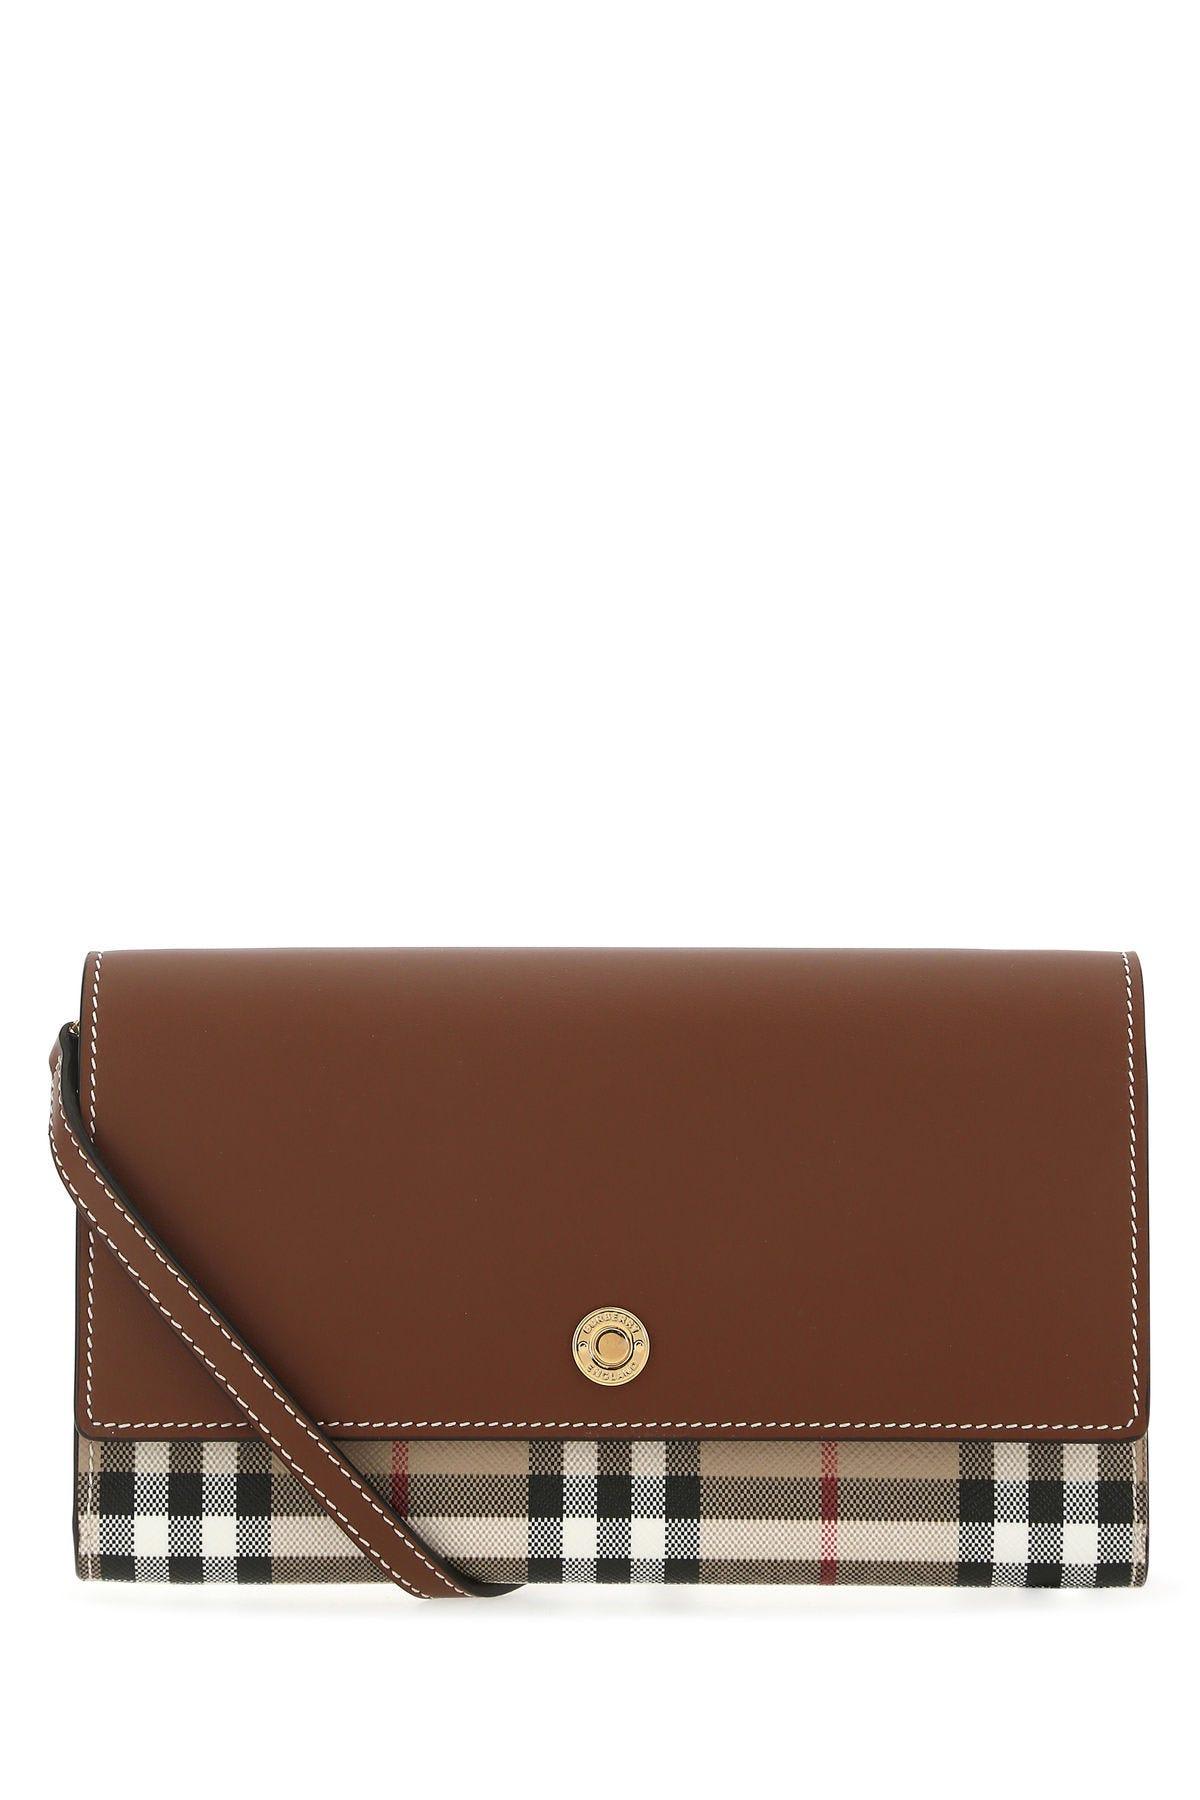 Burberry E-canvas And Leather Wallet